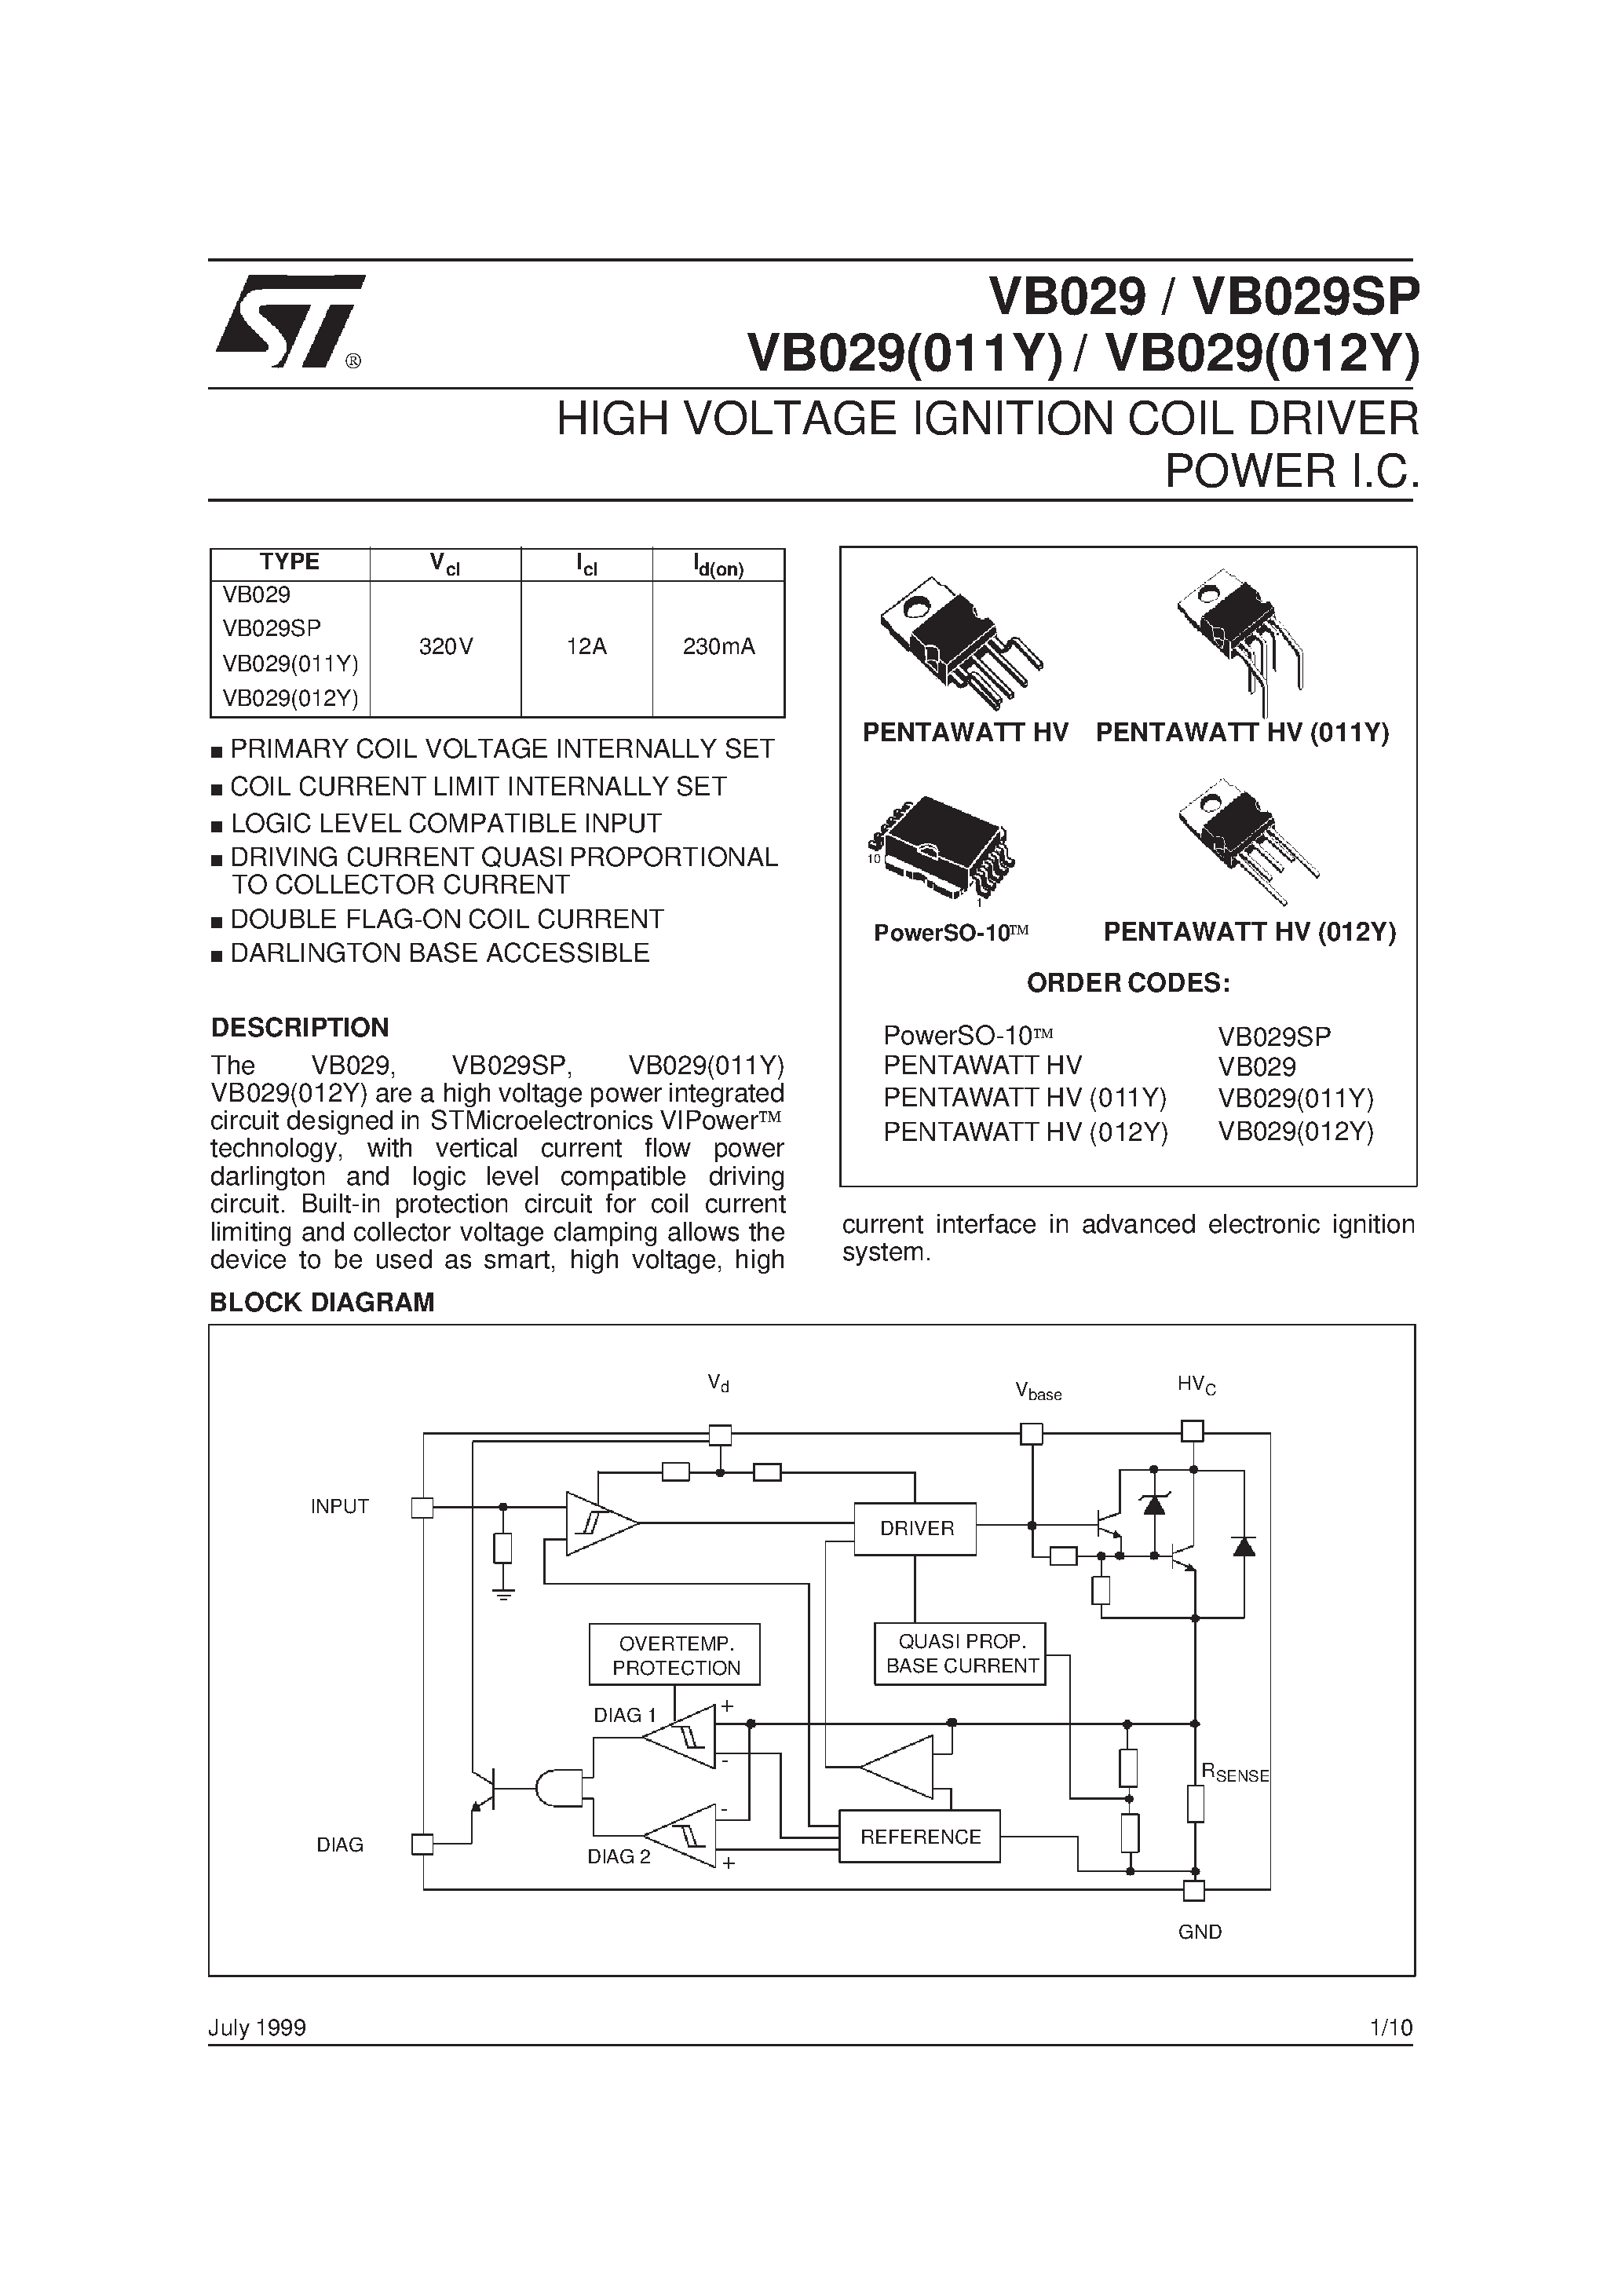 Datasheet VB029SP - HIGH VOLTAGE IGNITION COIL DRIVER POWER I.C. page 1